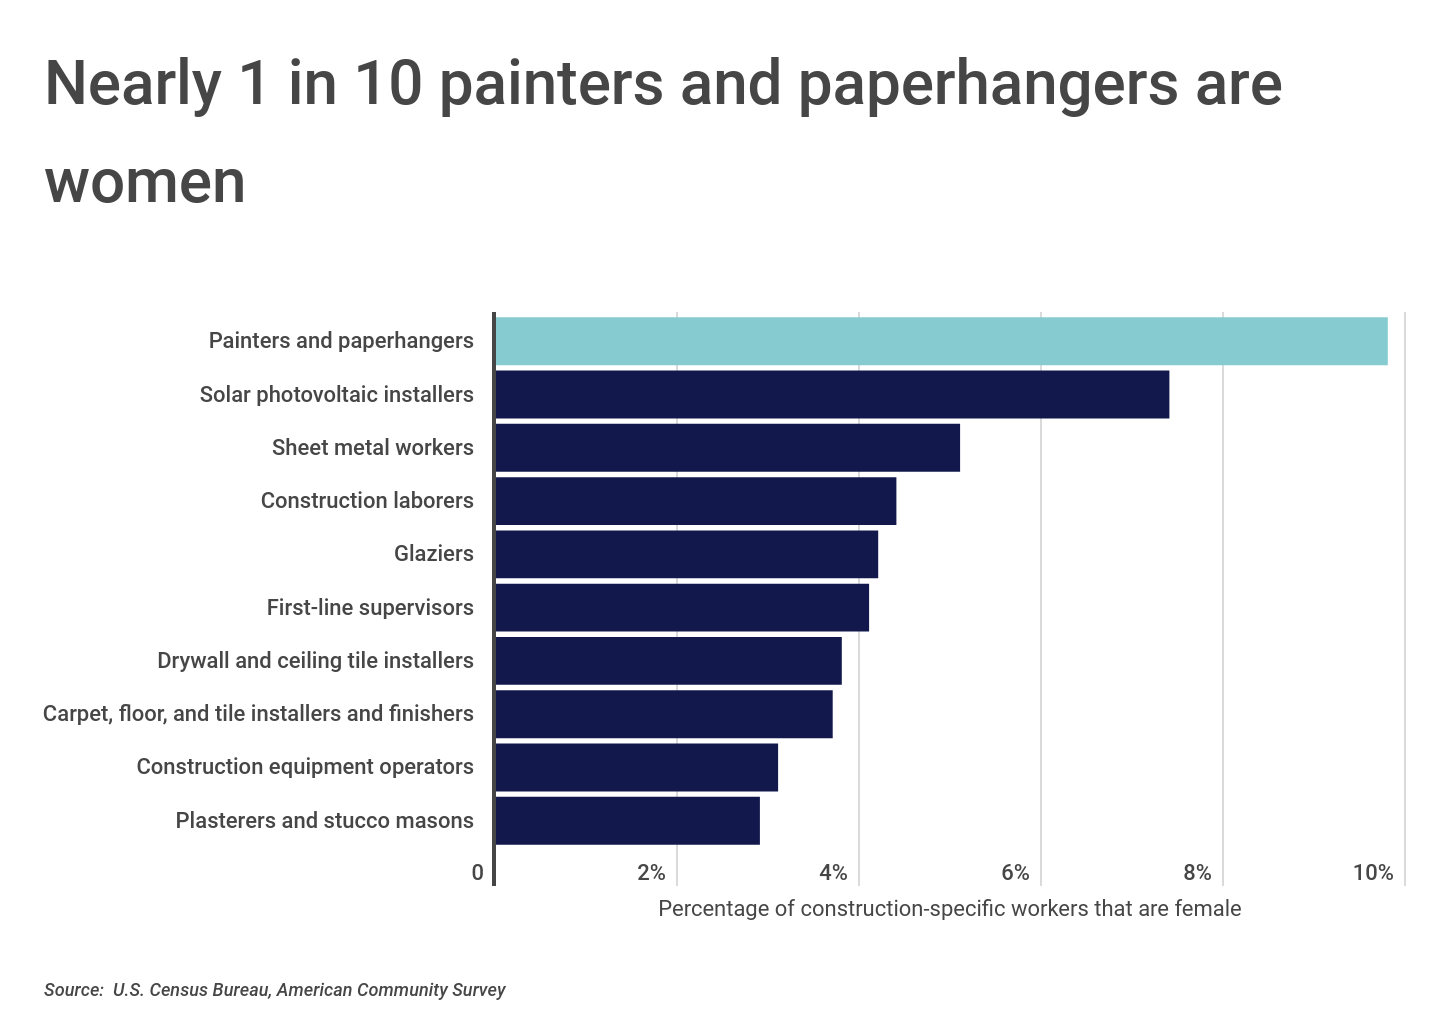 Chart3_Nearly 1 in 10 painters and paperhangers are women